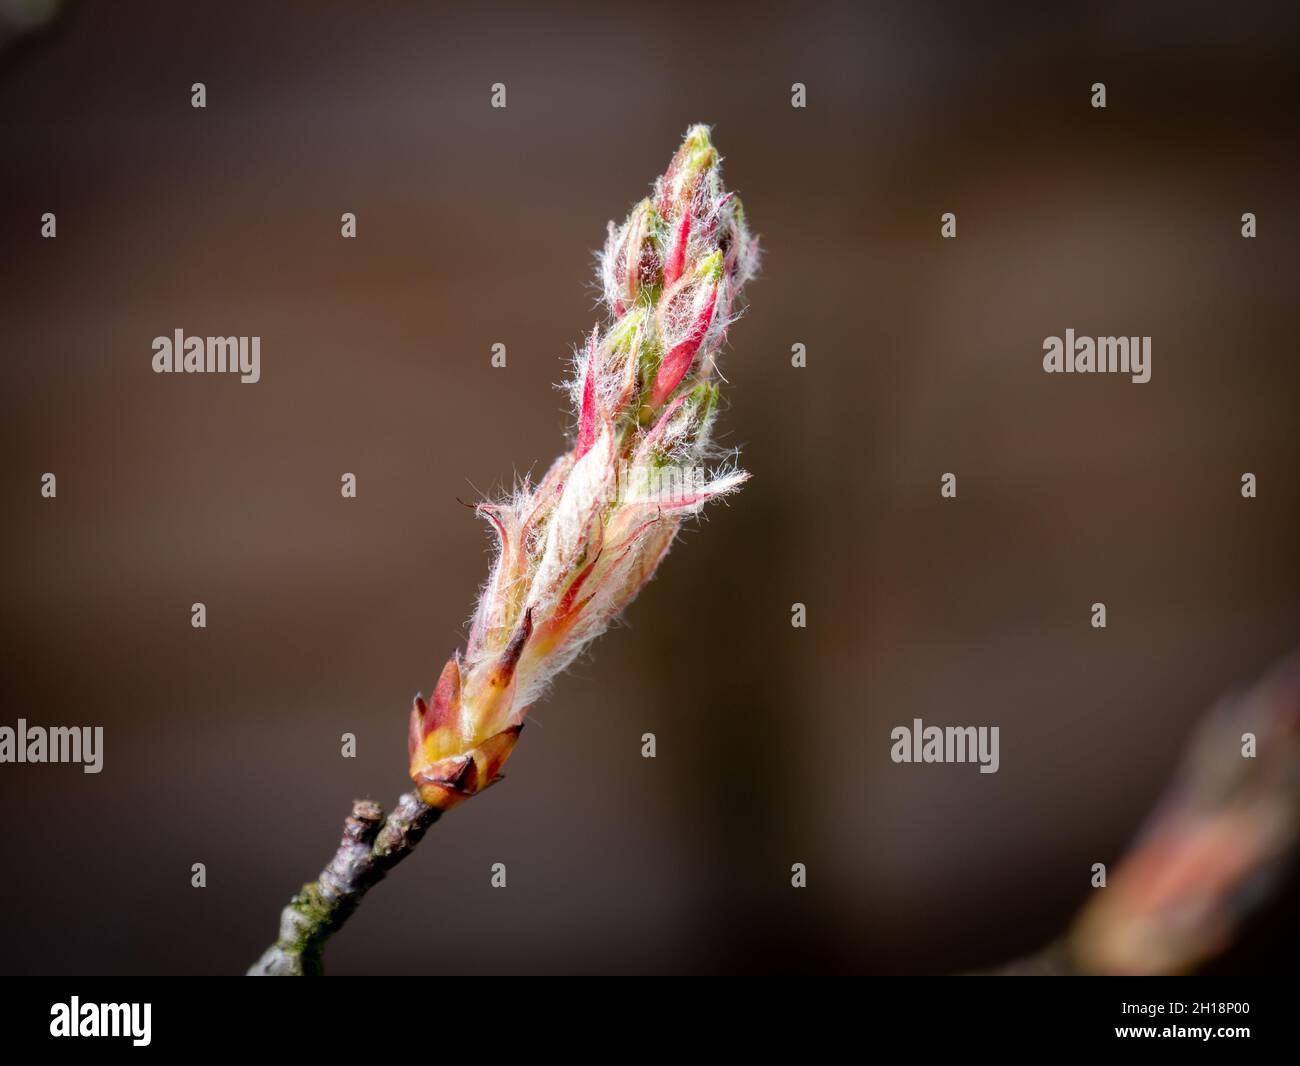 Snowy mespilus of juneberry, Amelanchier lamarkii, close up of twig with new bud in early spring, Netherlands Stock Photo